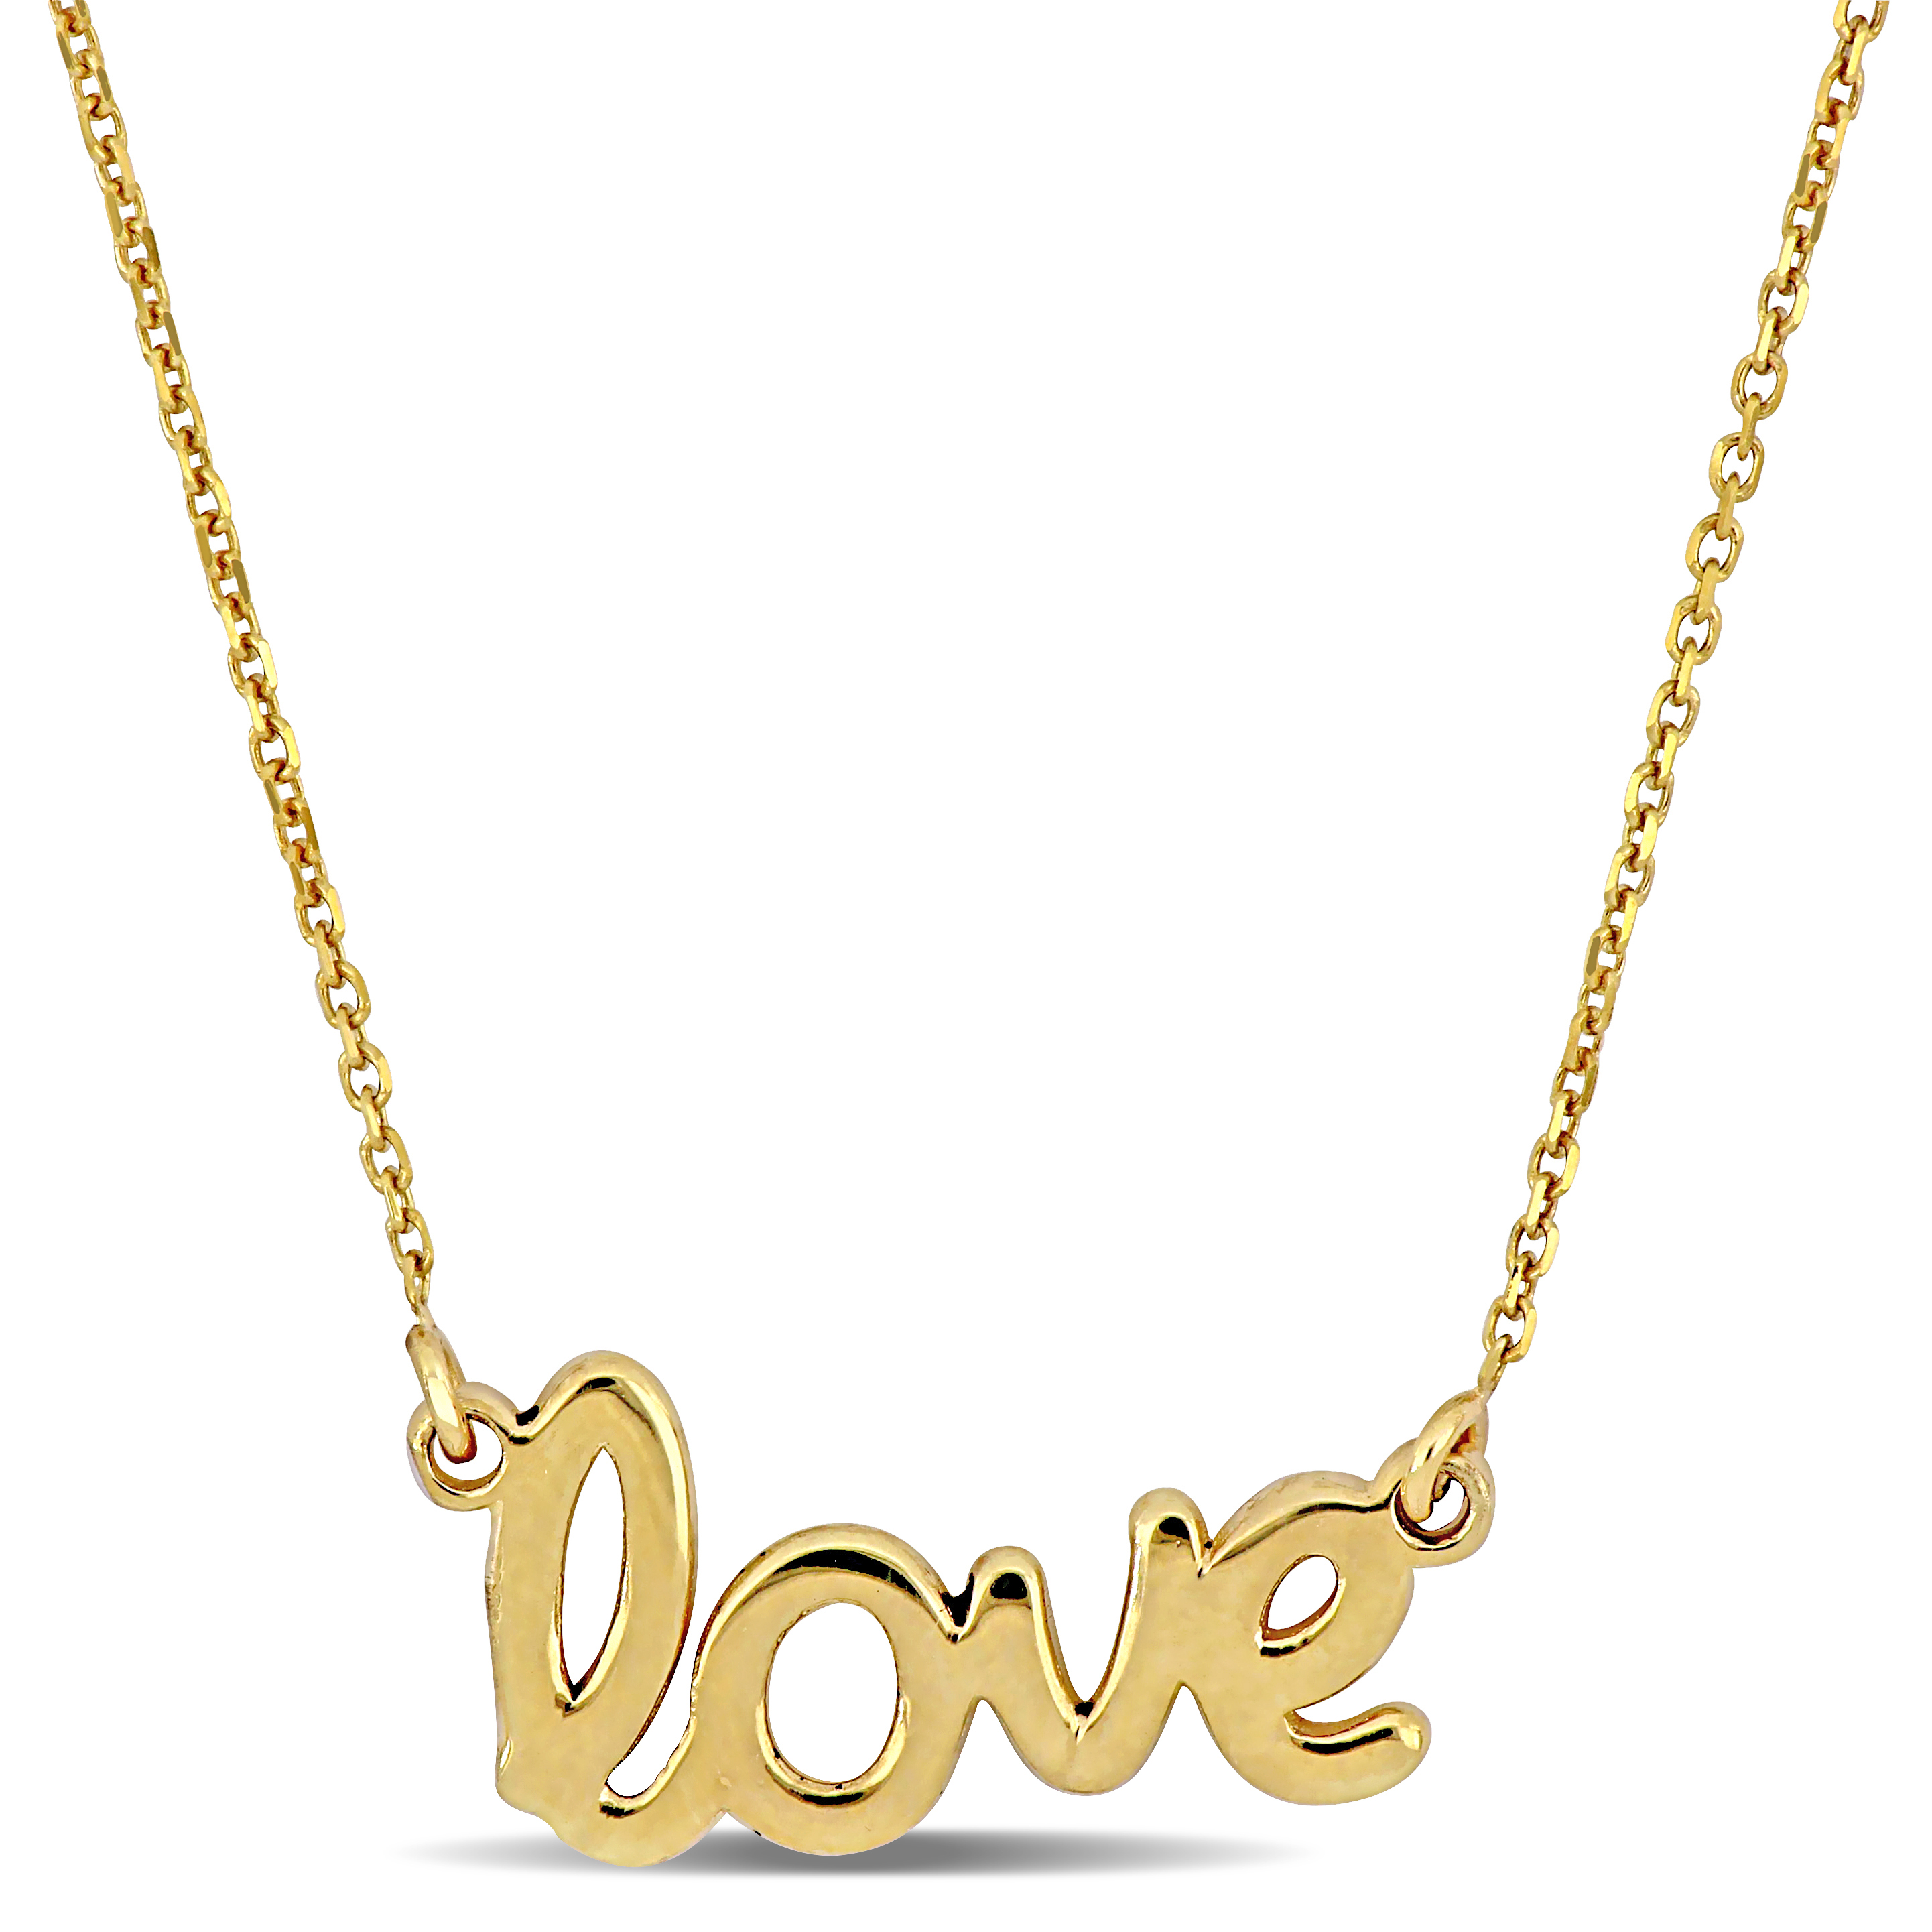 "LOVE" Necklace with Chain in 14k Yellow Gold - 16.5+1 in.